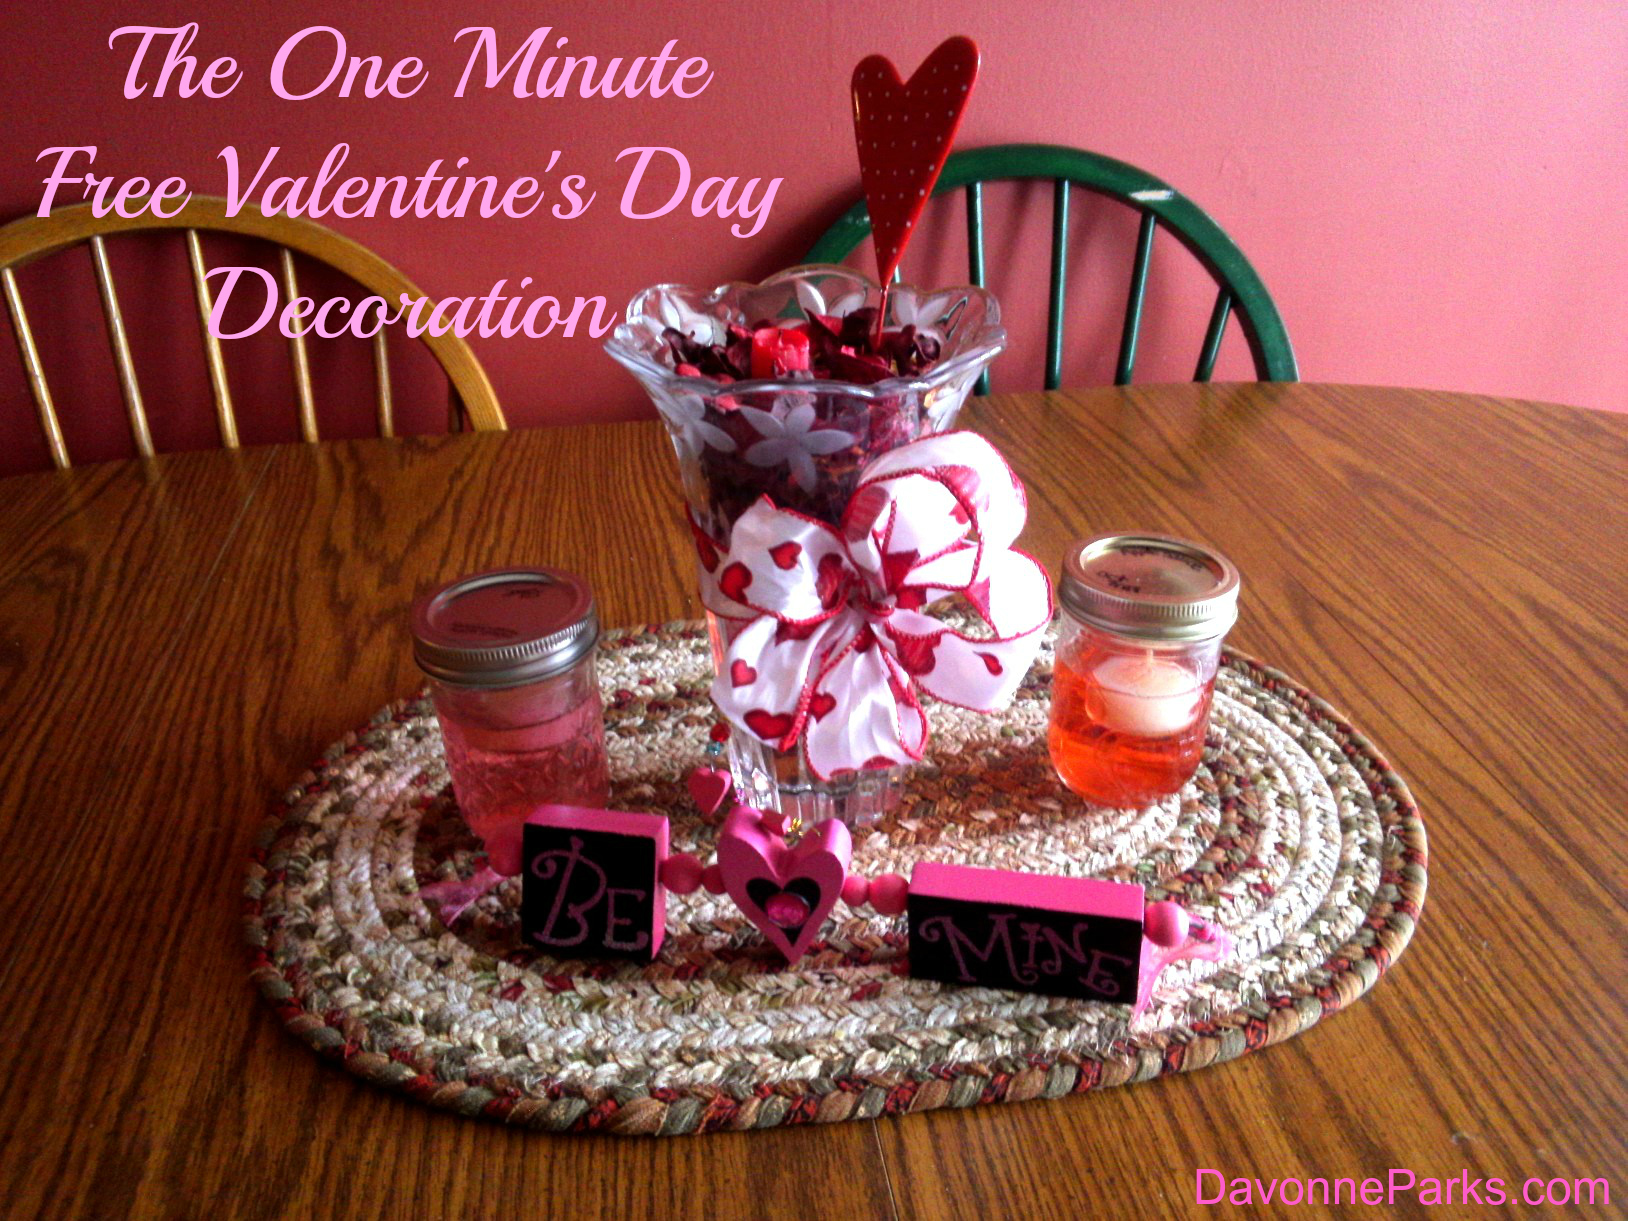 The Free, One-Minute Valentine’s Day Decoration